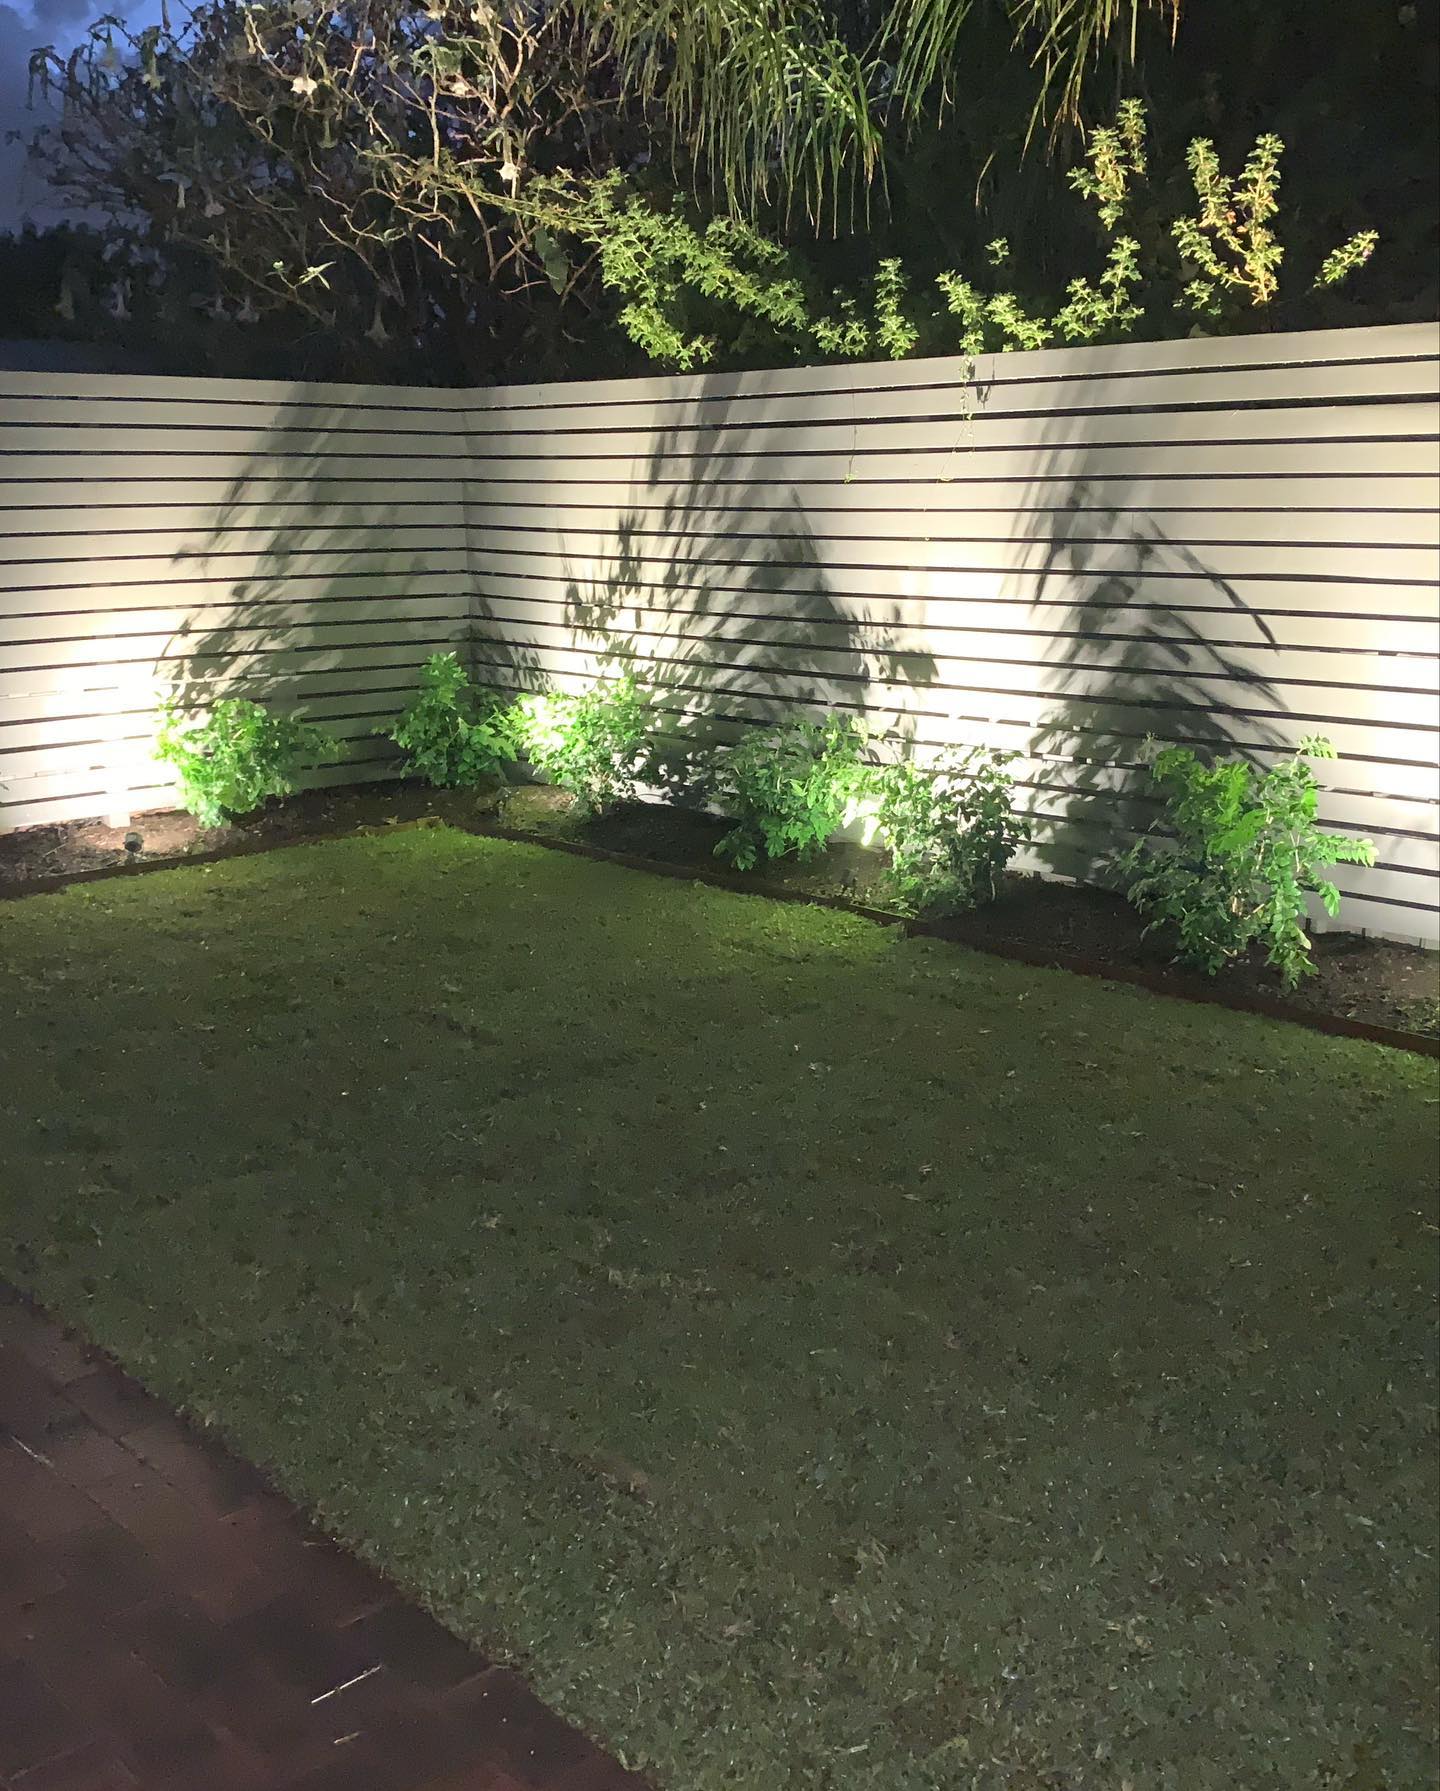 Lighting, Irrigation & Instant Lawn - Completed